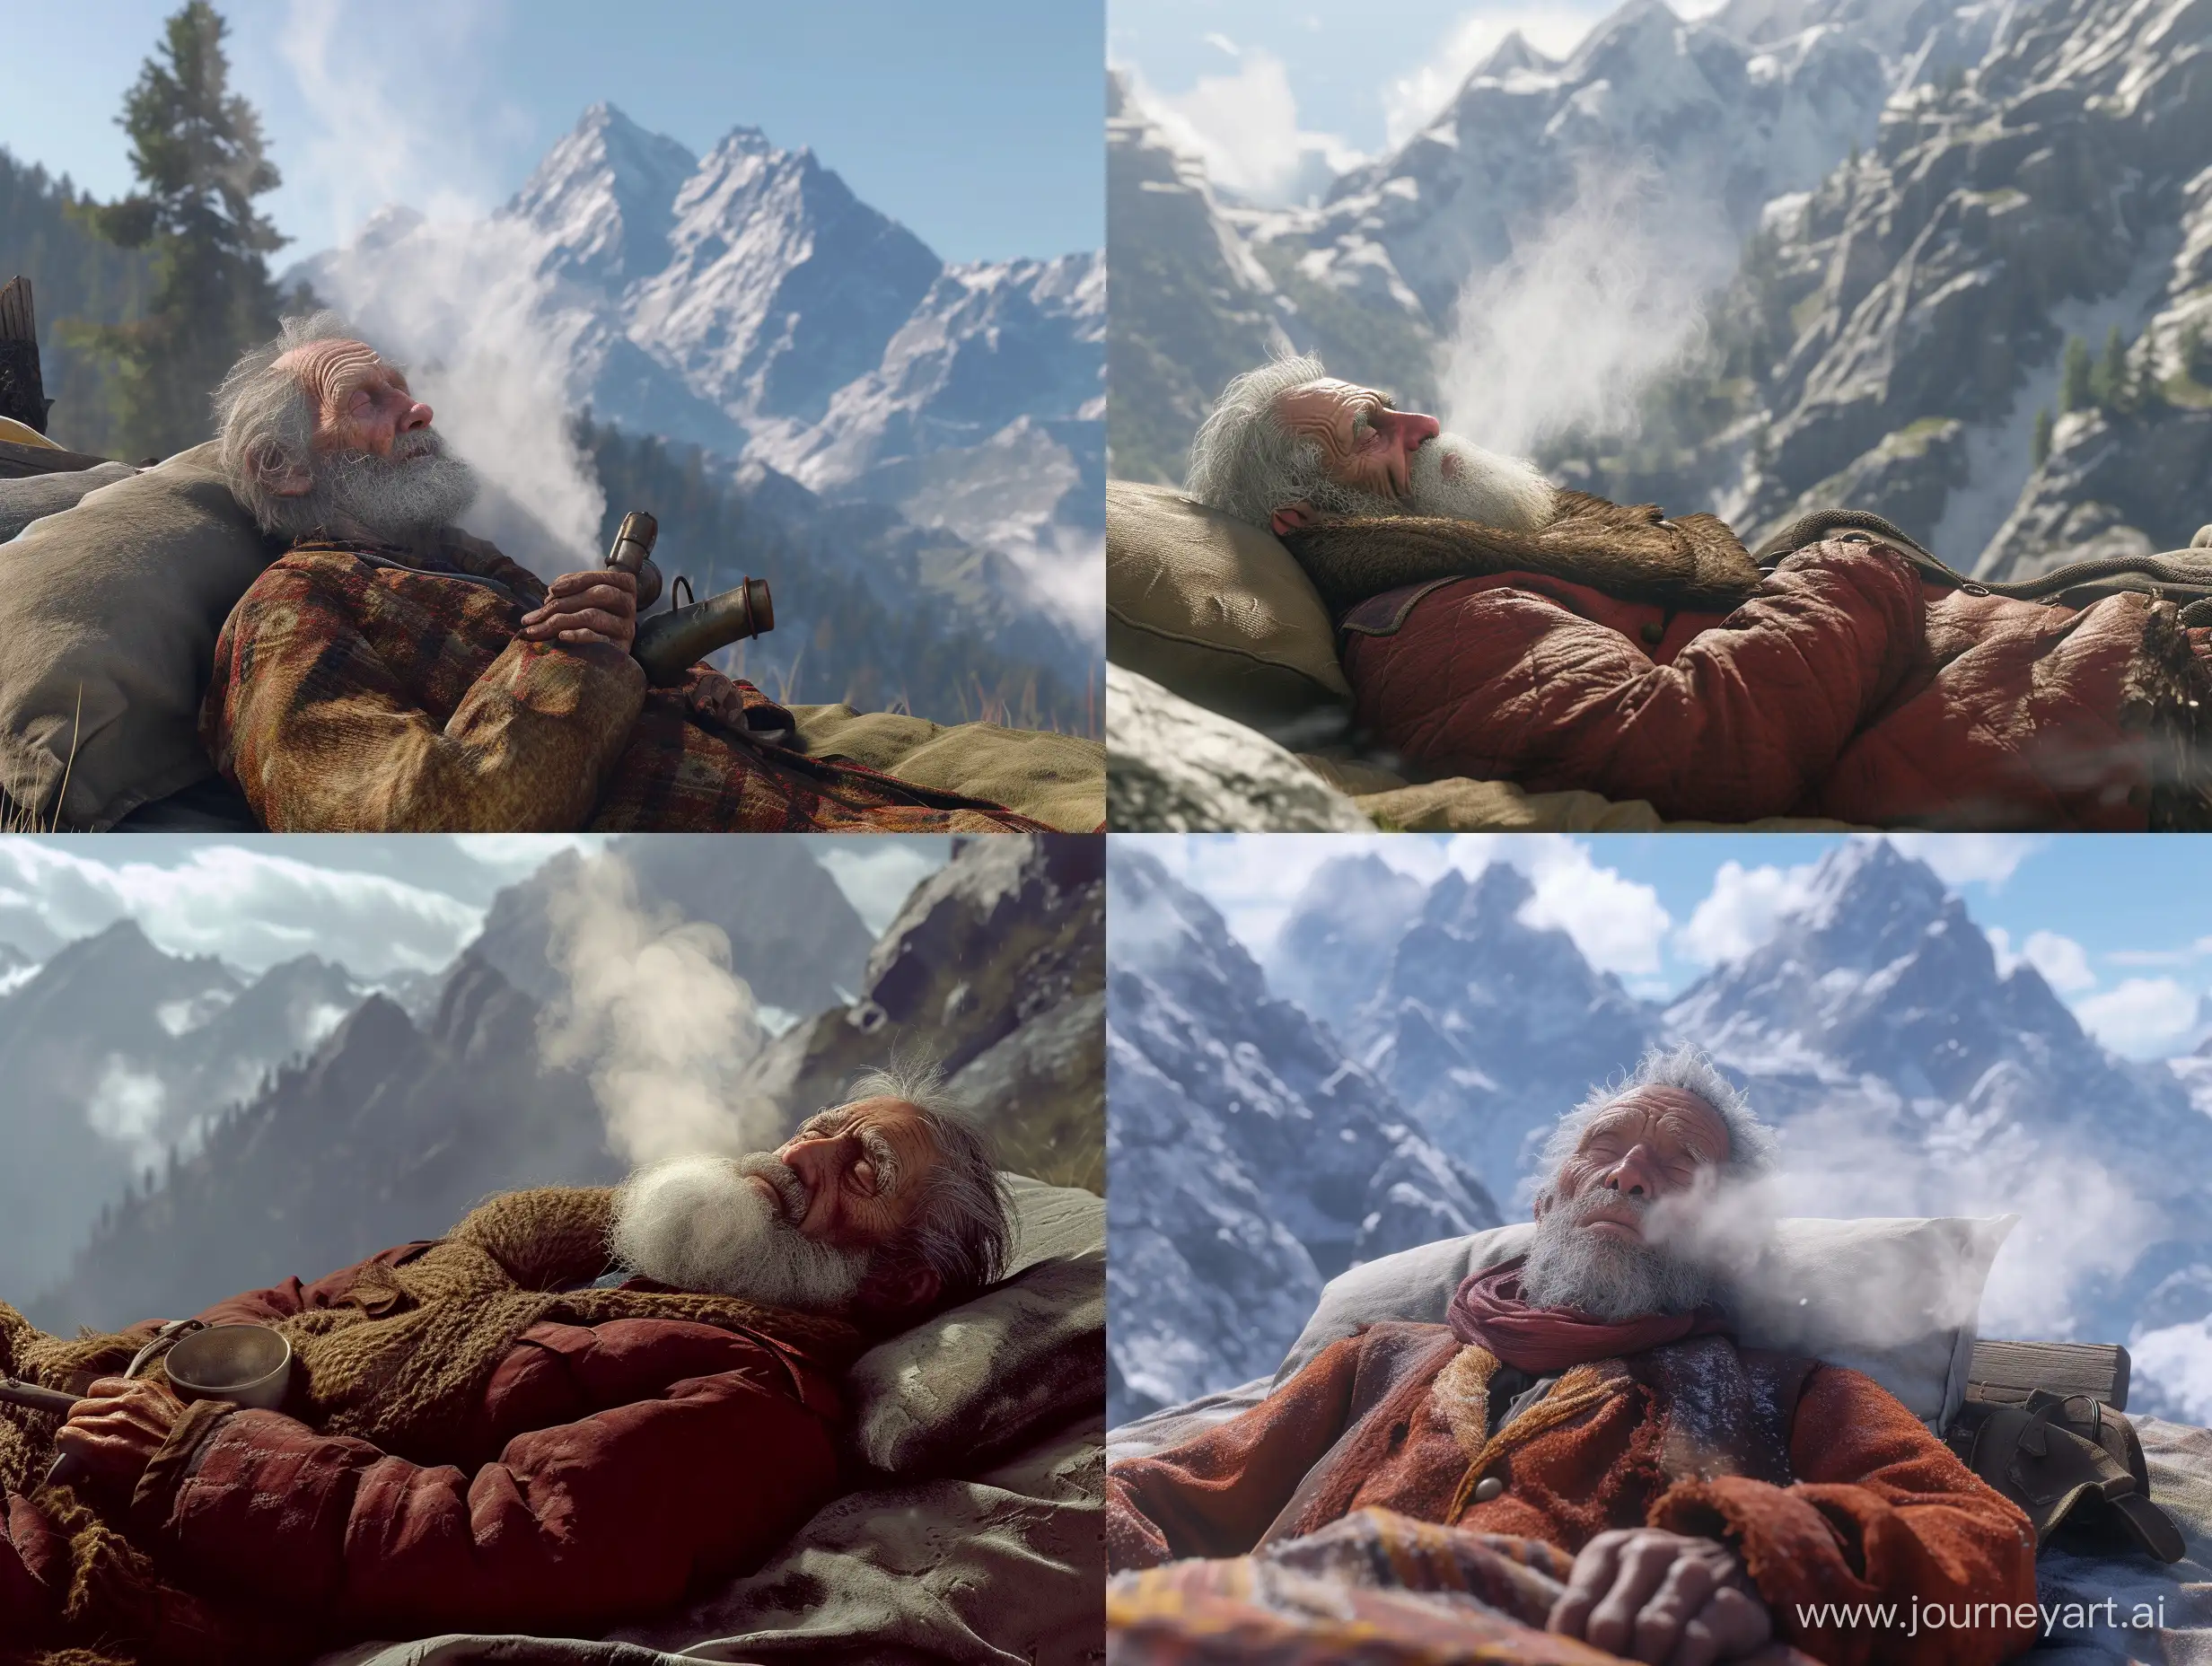 The character Sam from the game is SO old and lies on a bed in the middle of the mountains and steam comes out of his mouth, photorealism